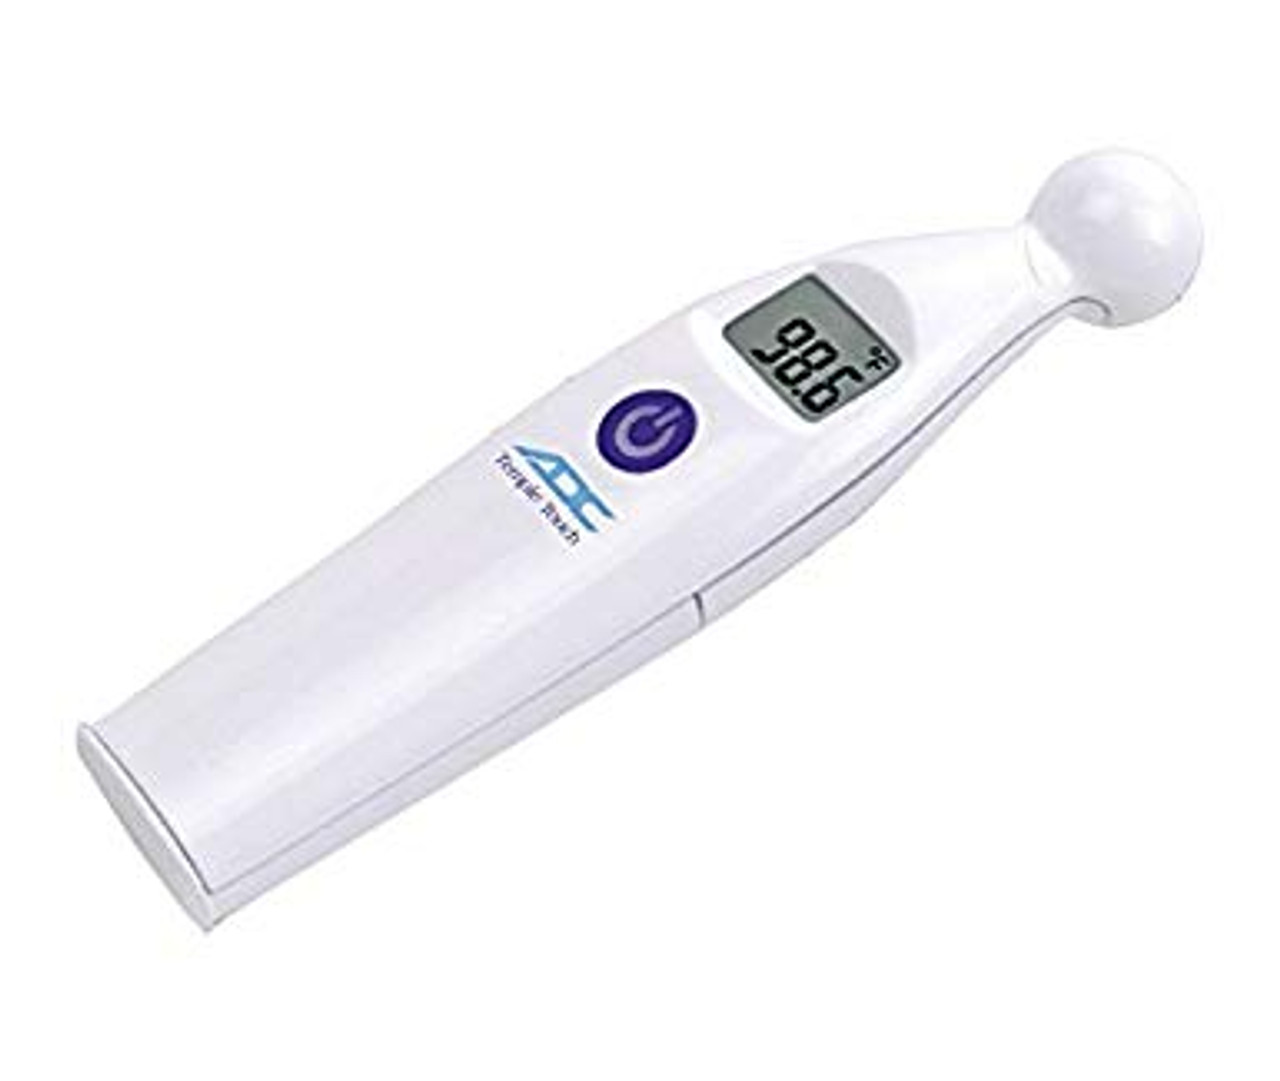 ADC 427 Adtemp Temple Touch Thermometer, Discontinued (ADC 427)